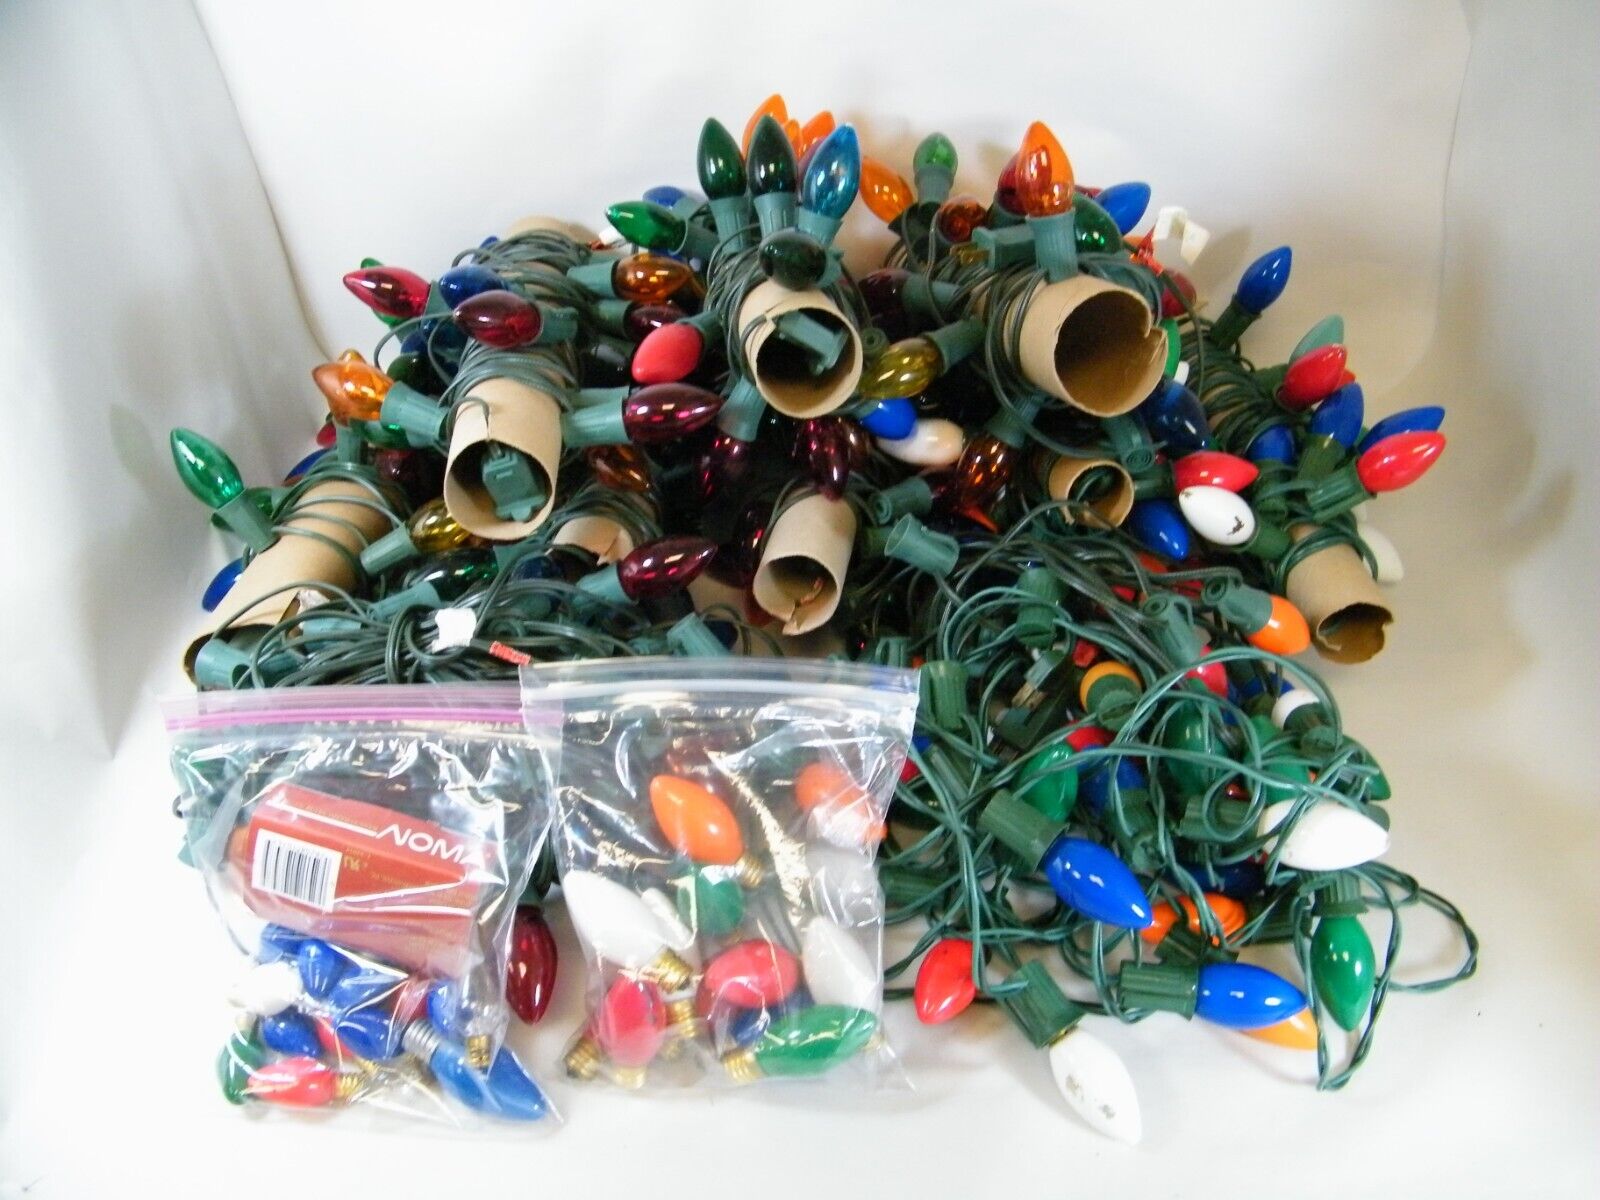 LOT OF C-9 LIGHT STRING SETS, MULTICOLORED, CLEAR & COLORED BULBS + REPLACEMENTS